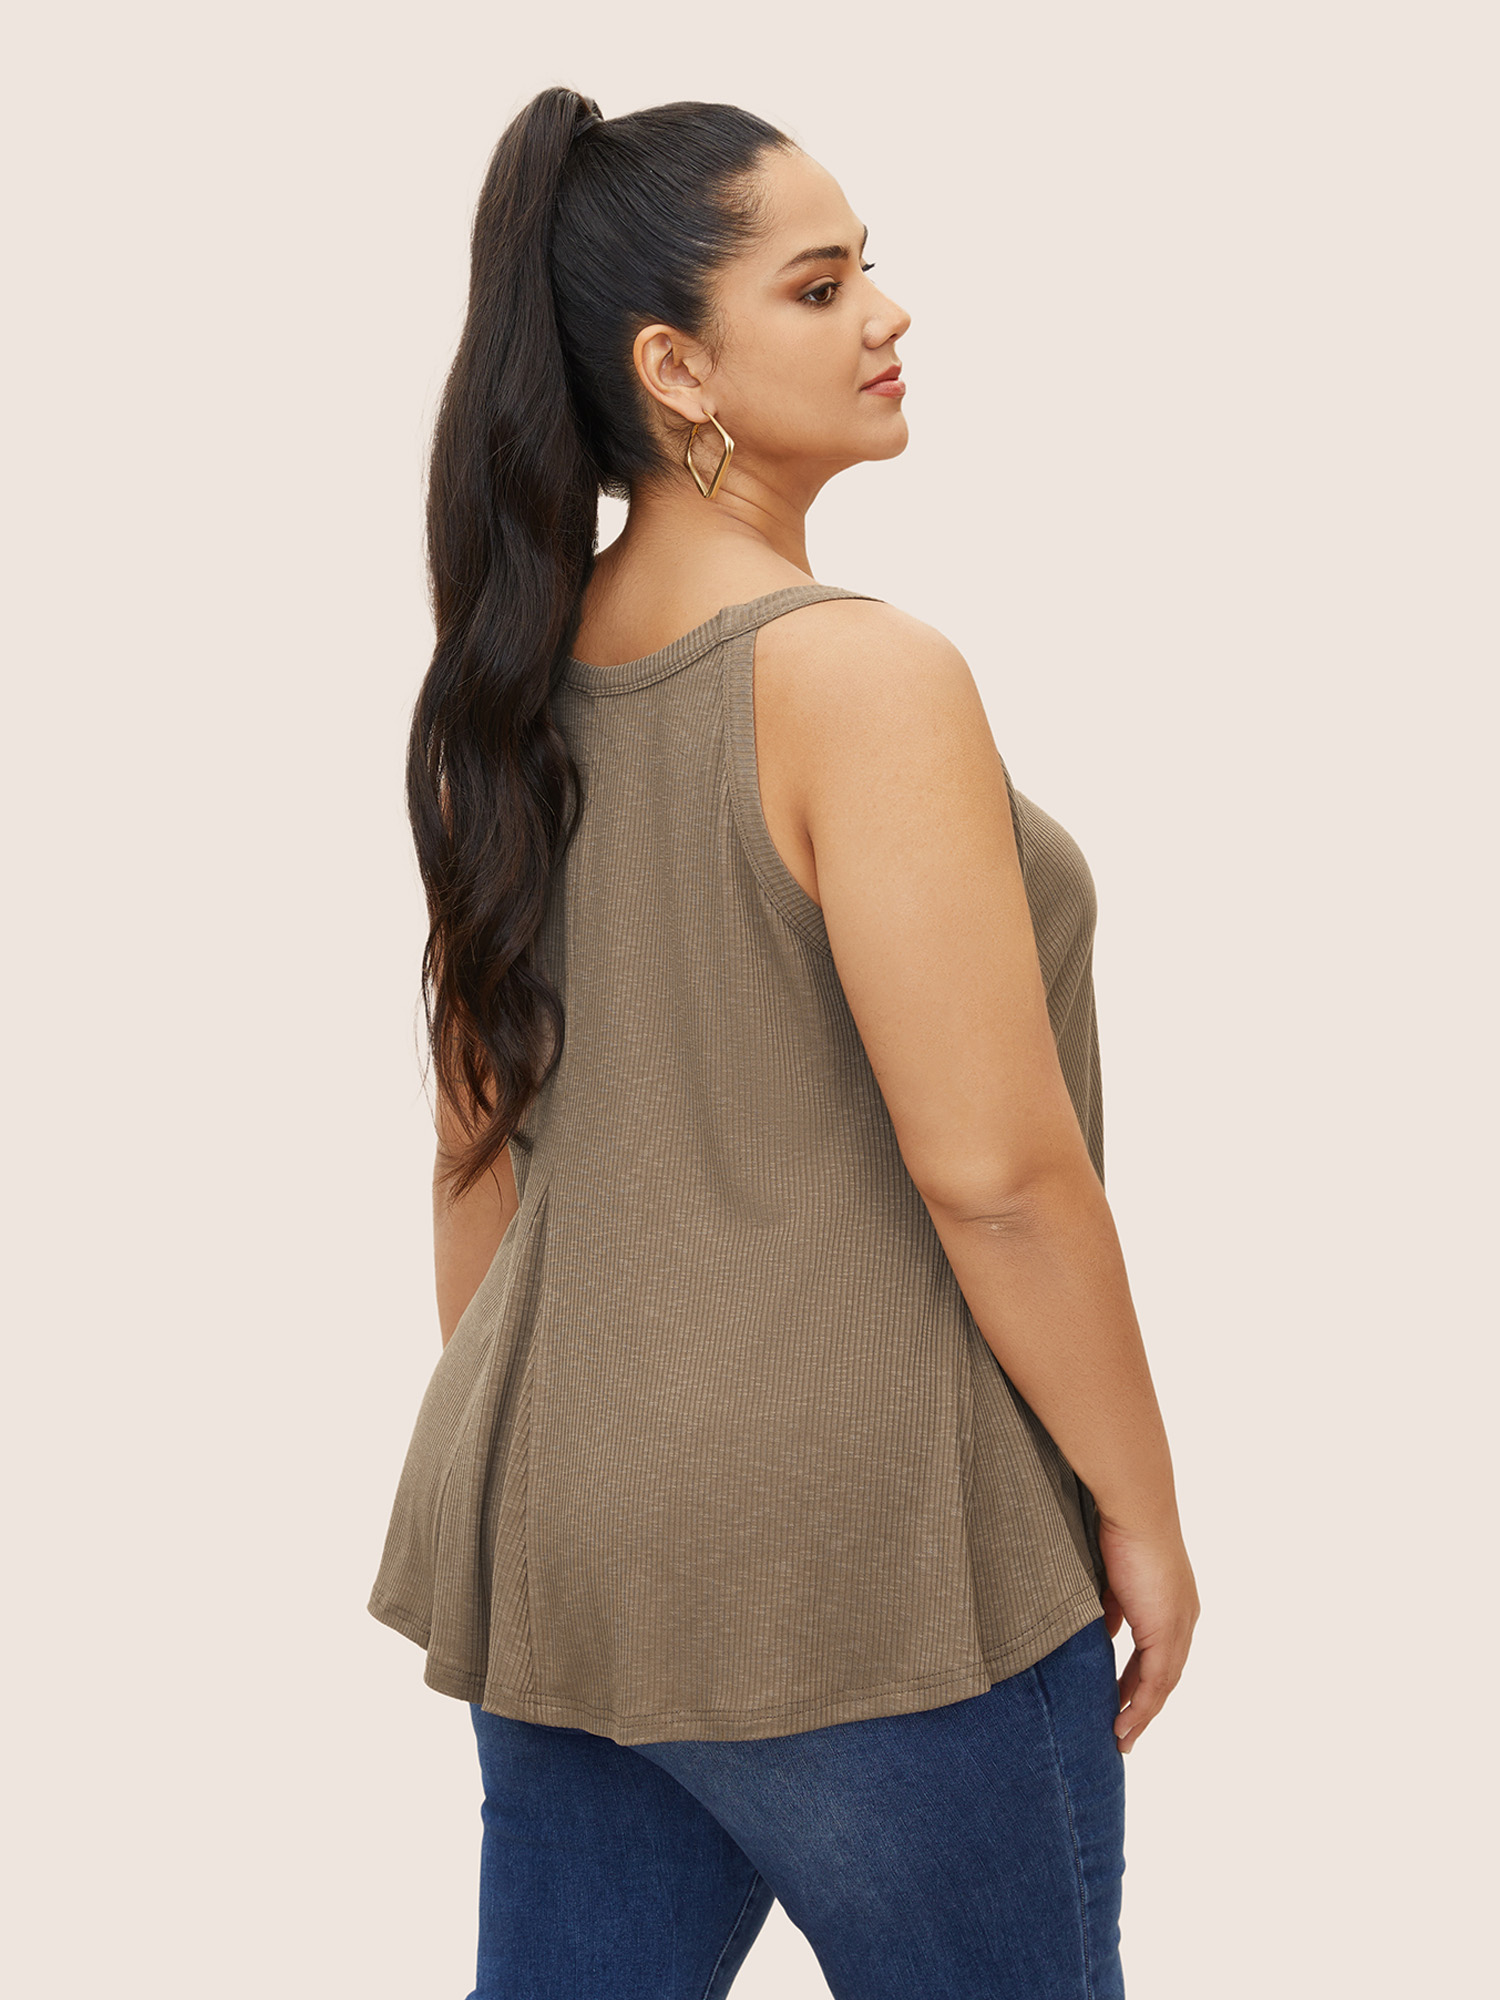 

Plus Size Solid Texture Pit Strip Cami Top Women LightBrown Casual Texture V-neck Everyday Tank Tops Camis BloomChic